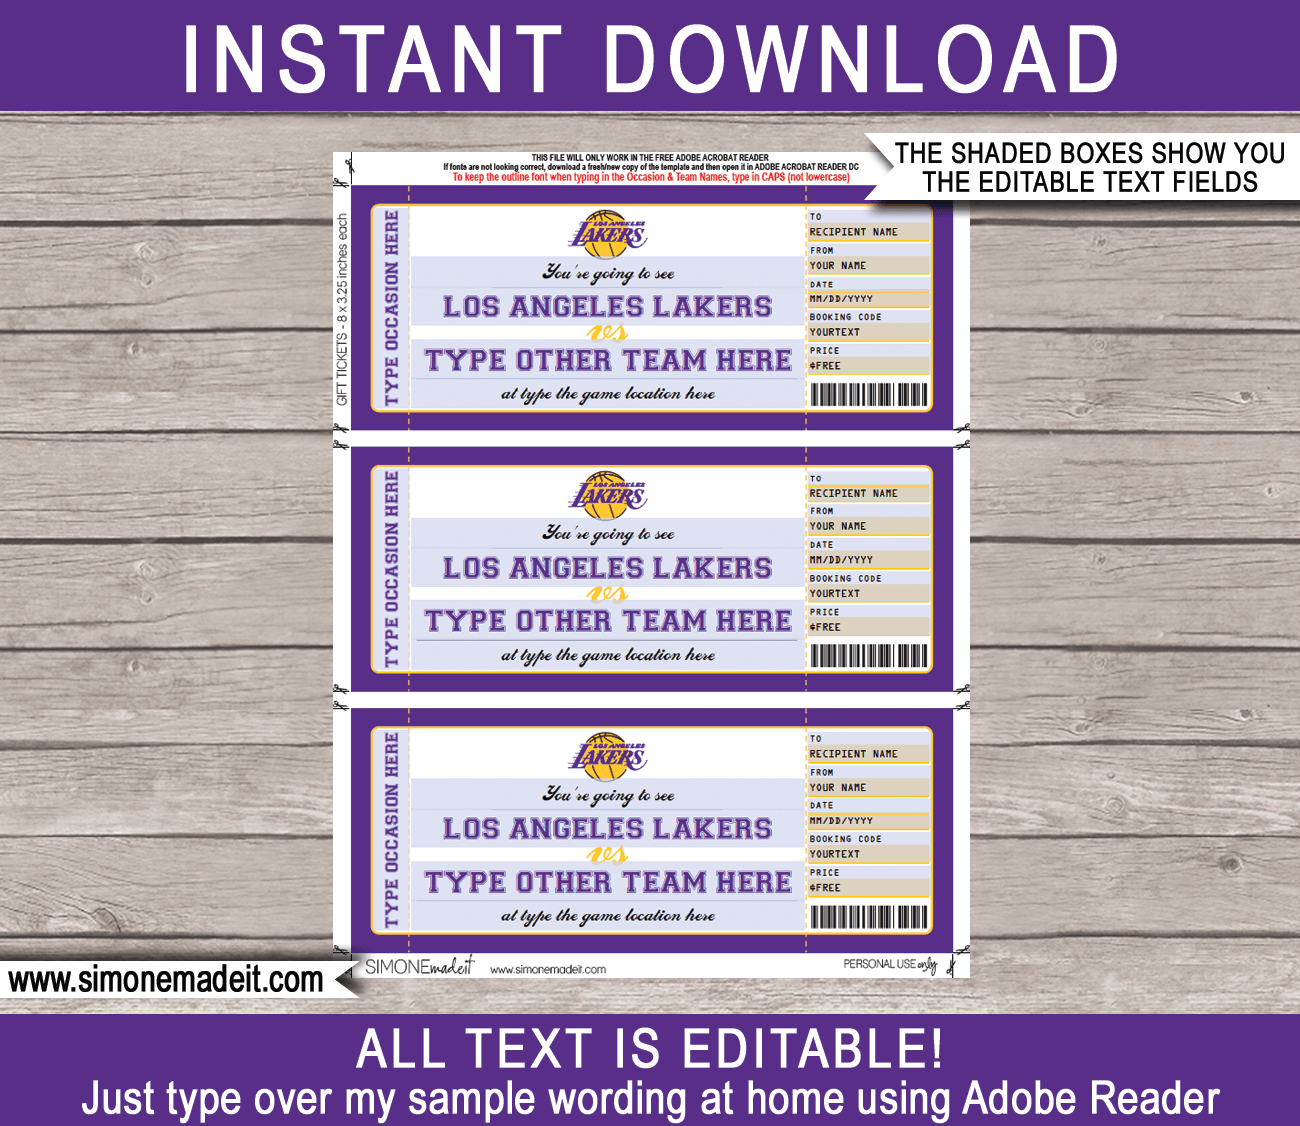 Los Angeles Lakers Game Ticket Gift Voucher Printable Surprise NBA